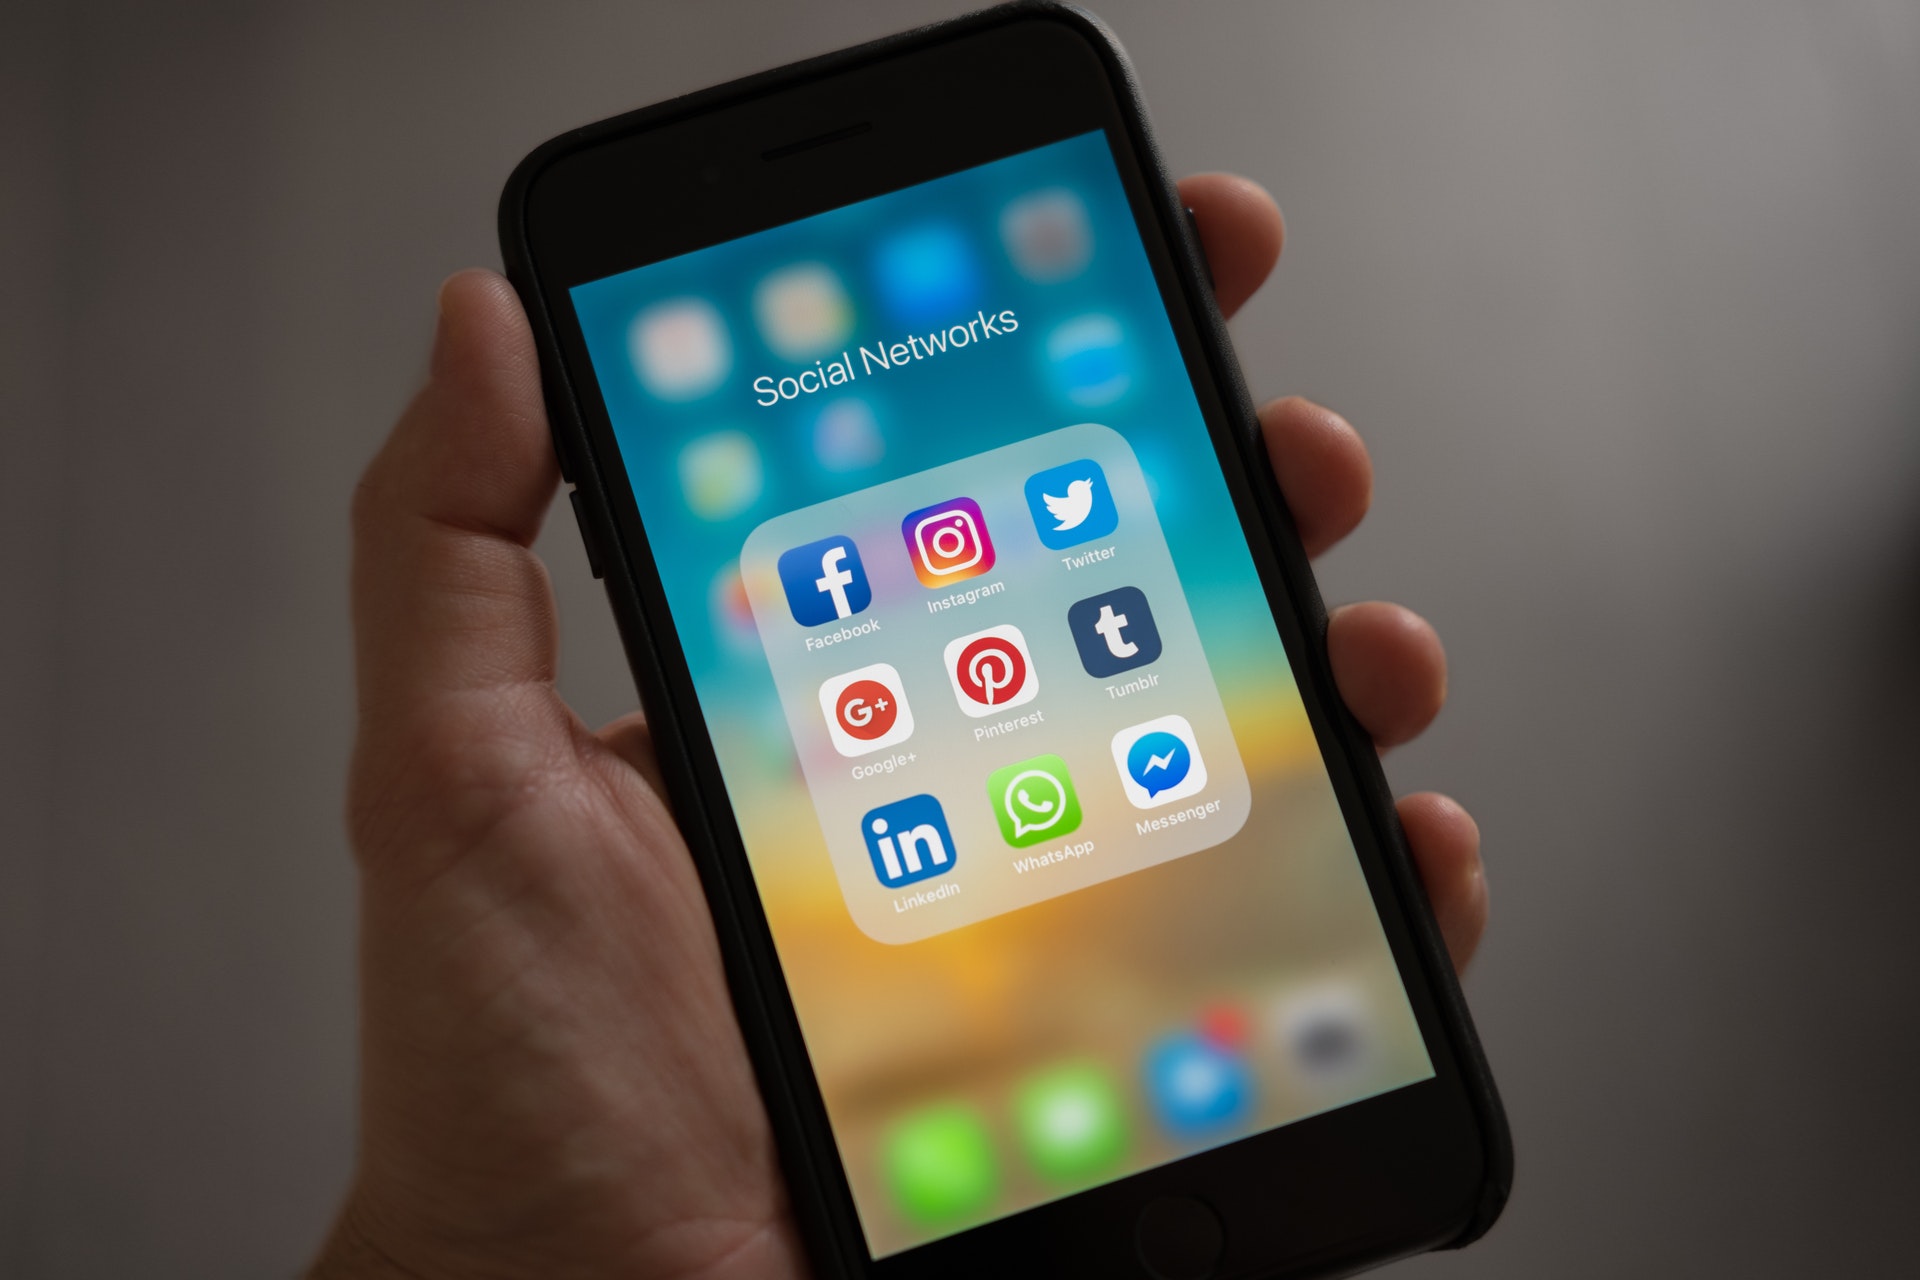 Is social media good for your mental health? The increased anxiety it can bring may be a detriment to your state of mind.